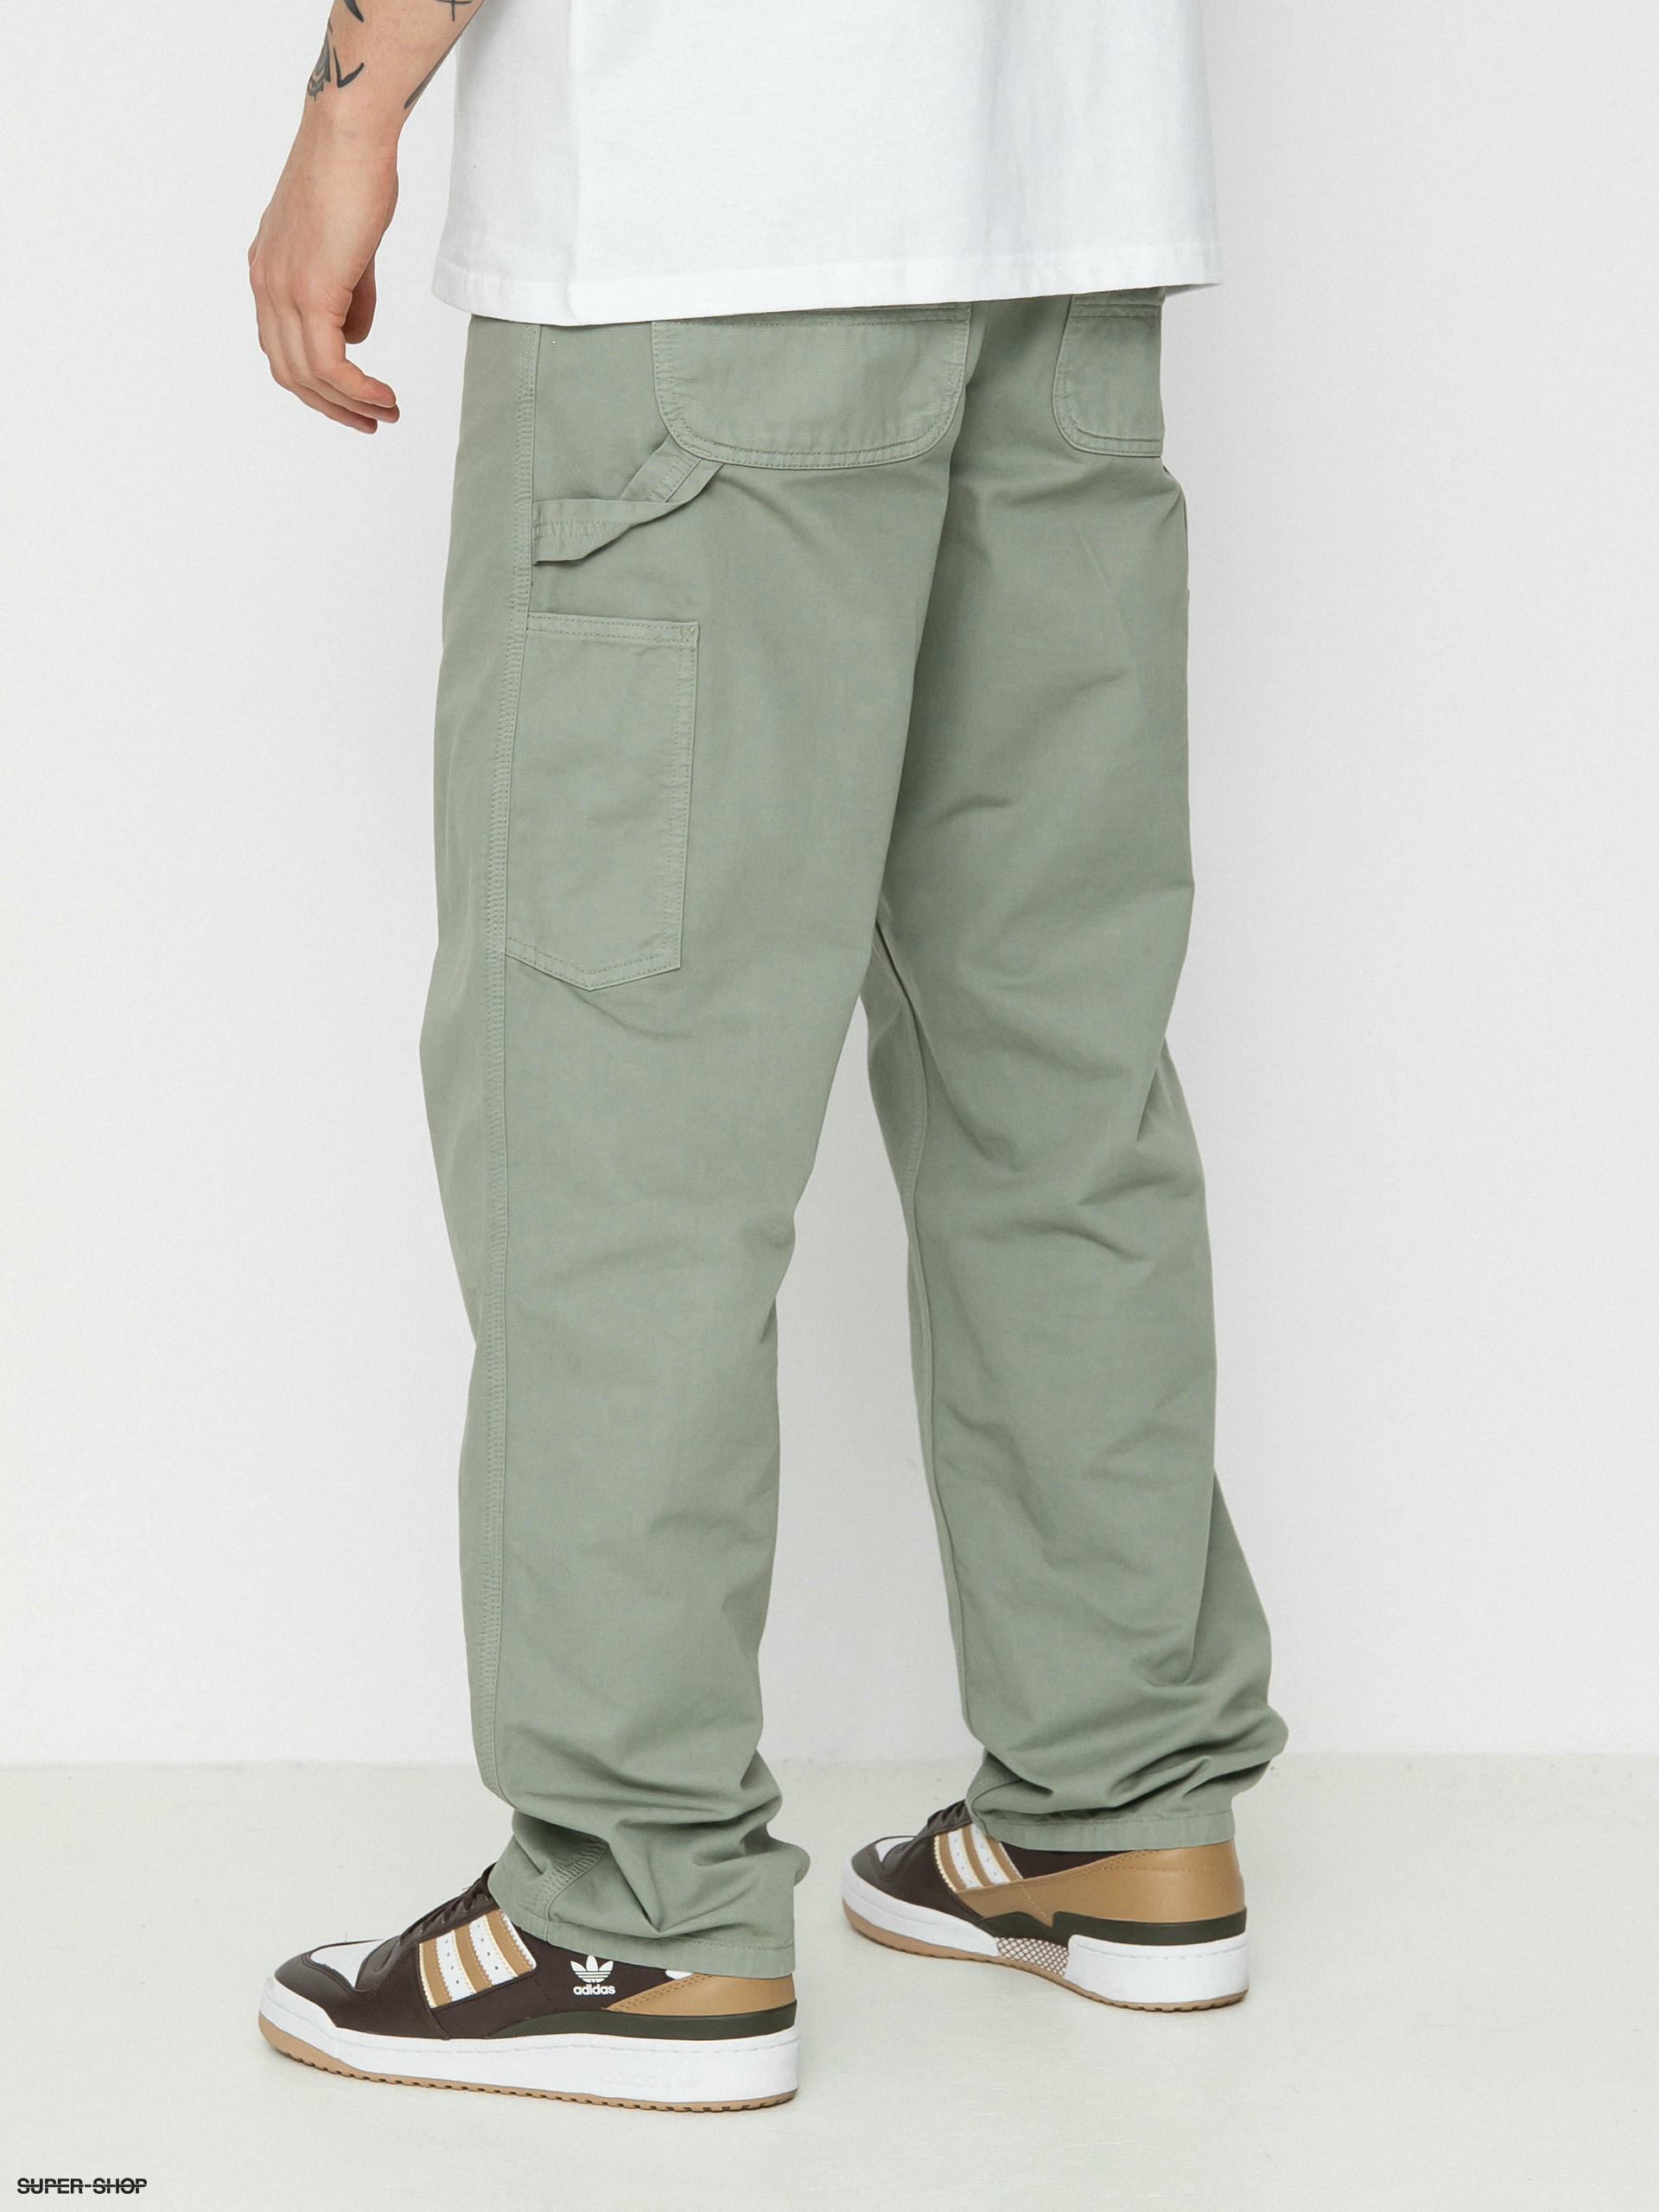 CARHARTT WIP: pants for man - White  Carhartt Wip pants I031499 online at